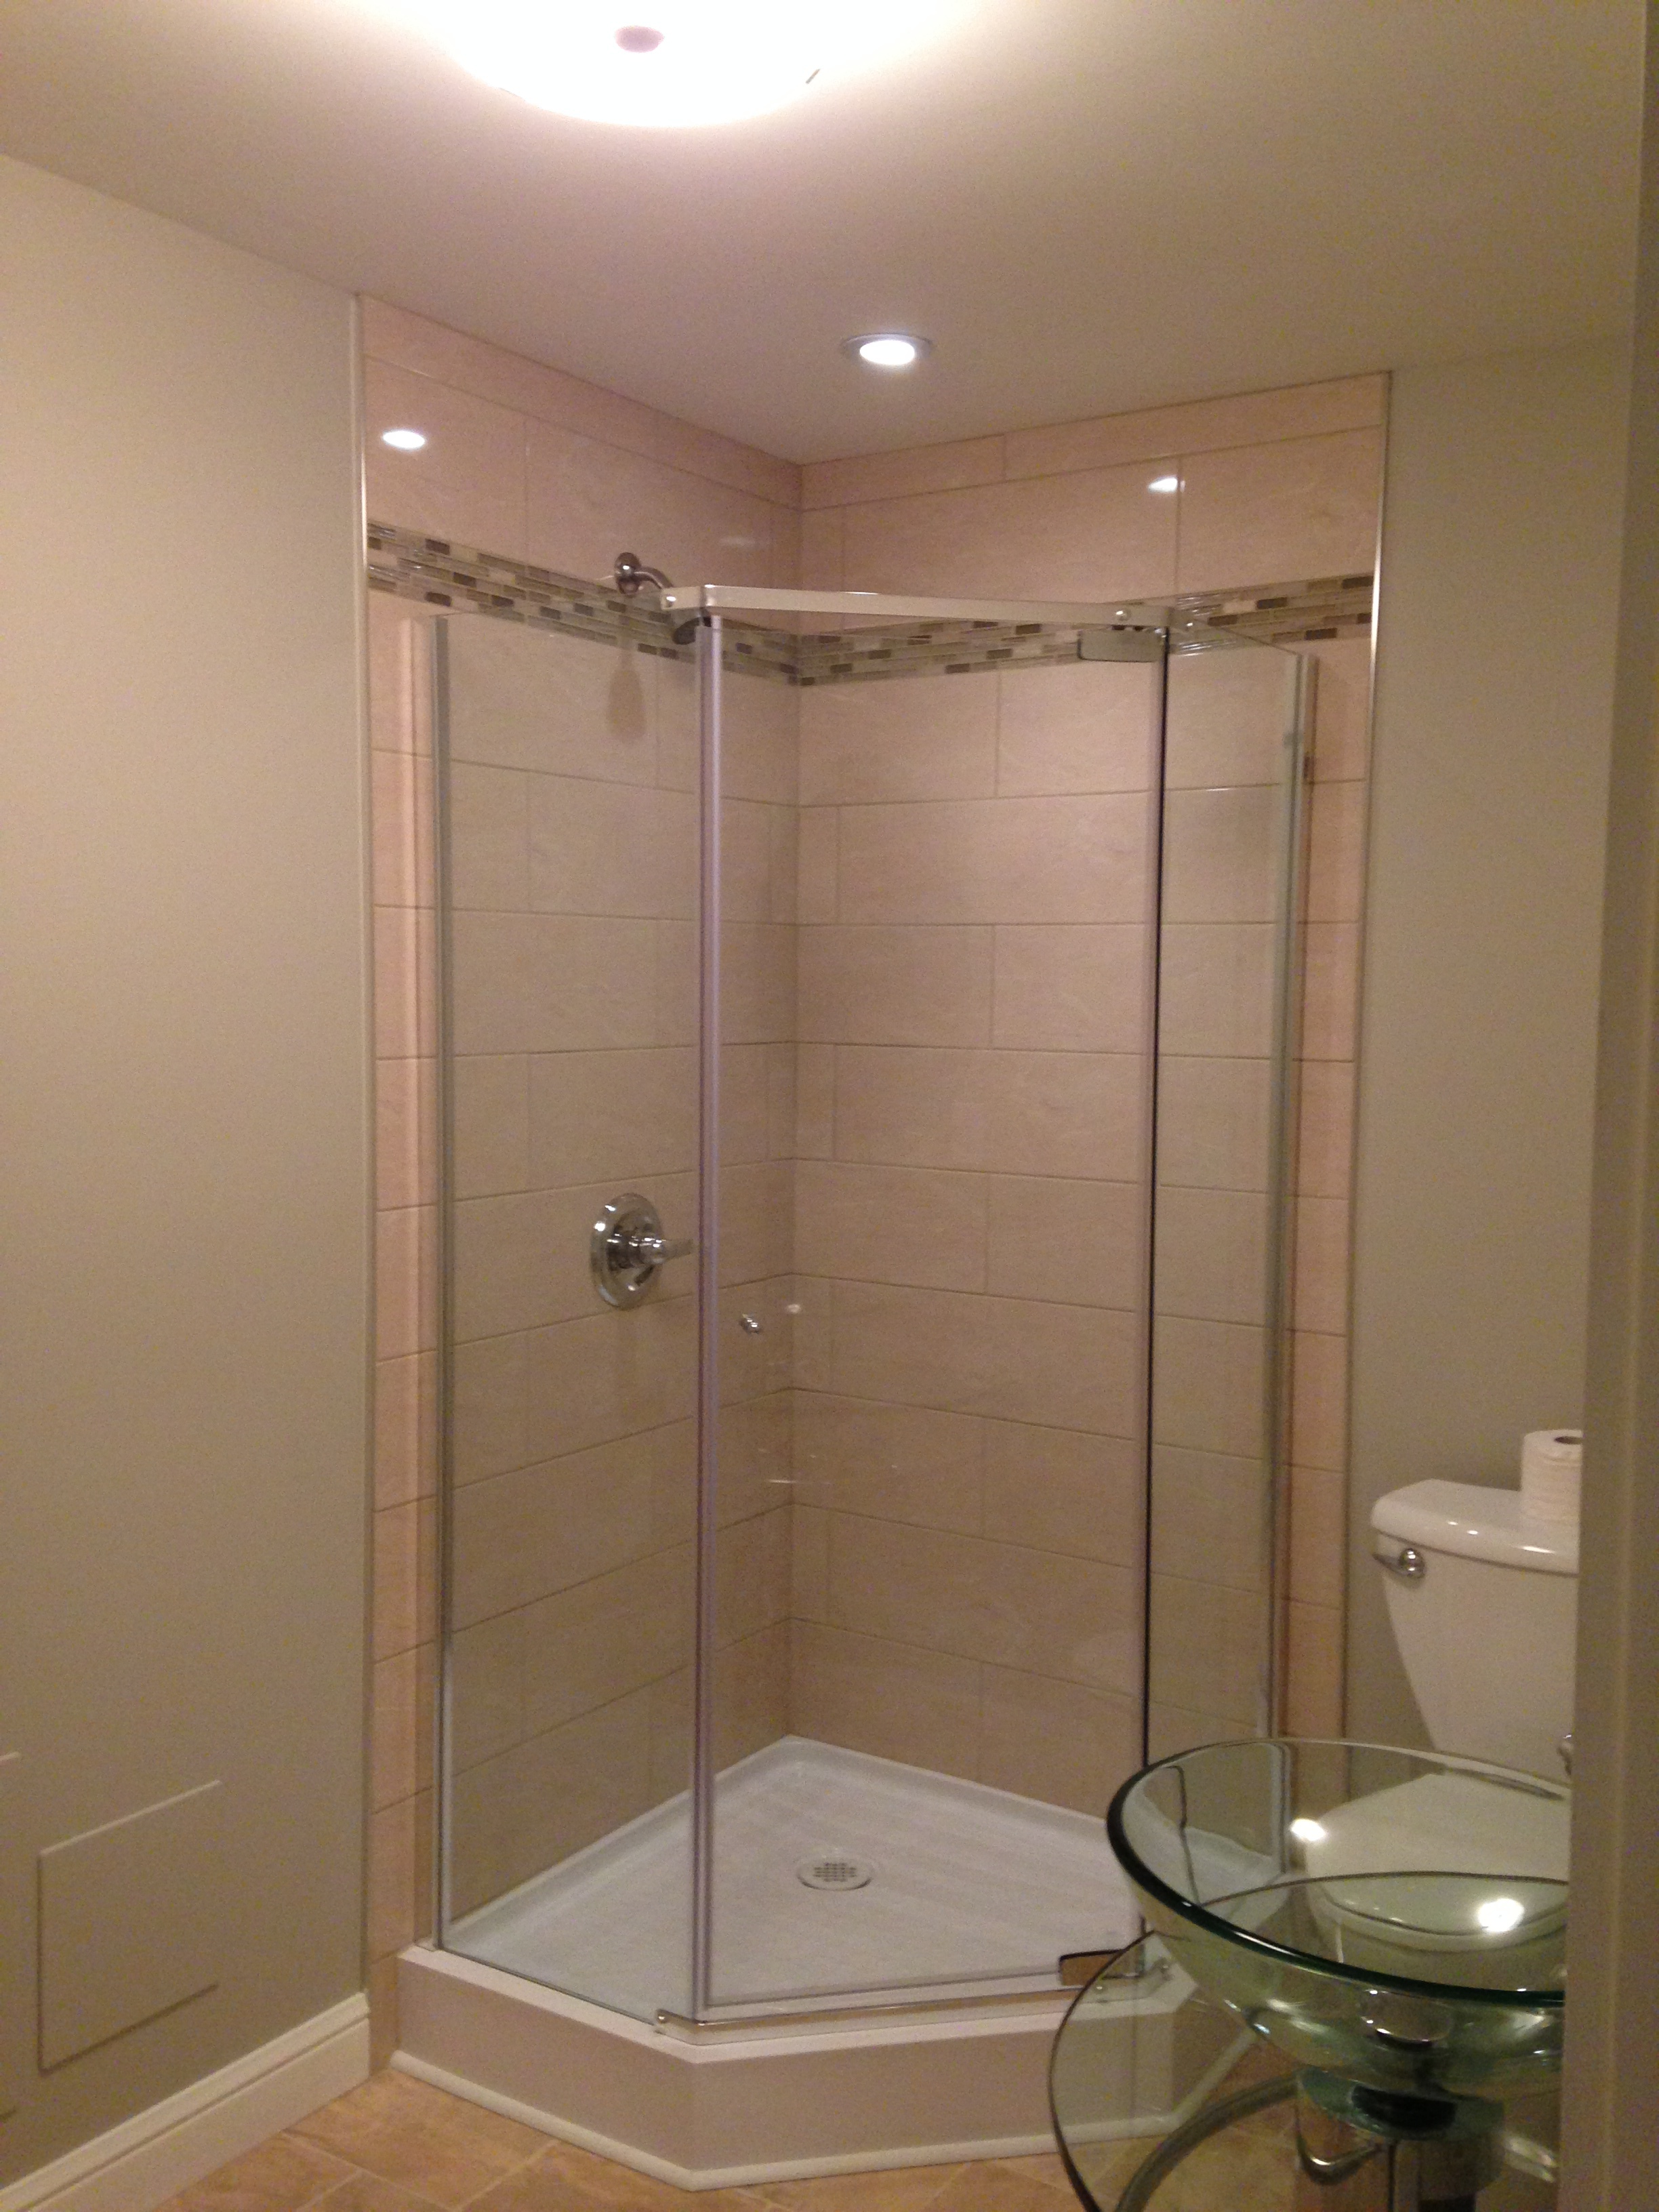 Custom tiled shower with acrylic base and glass doors